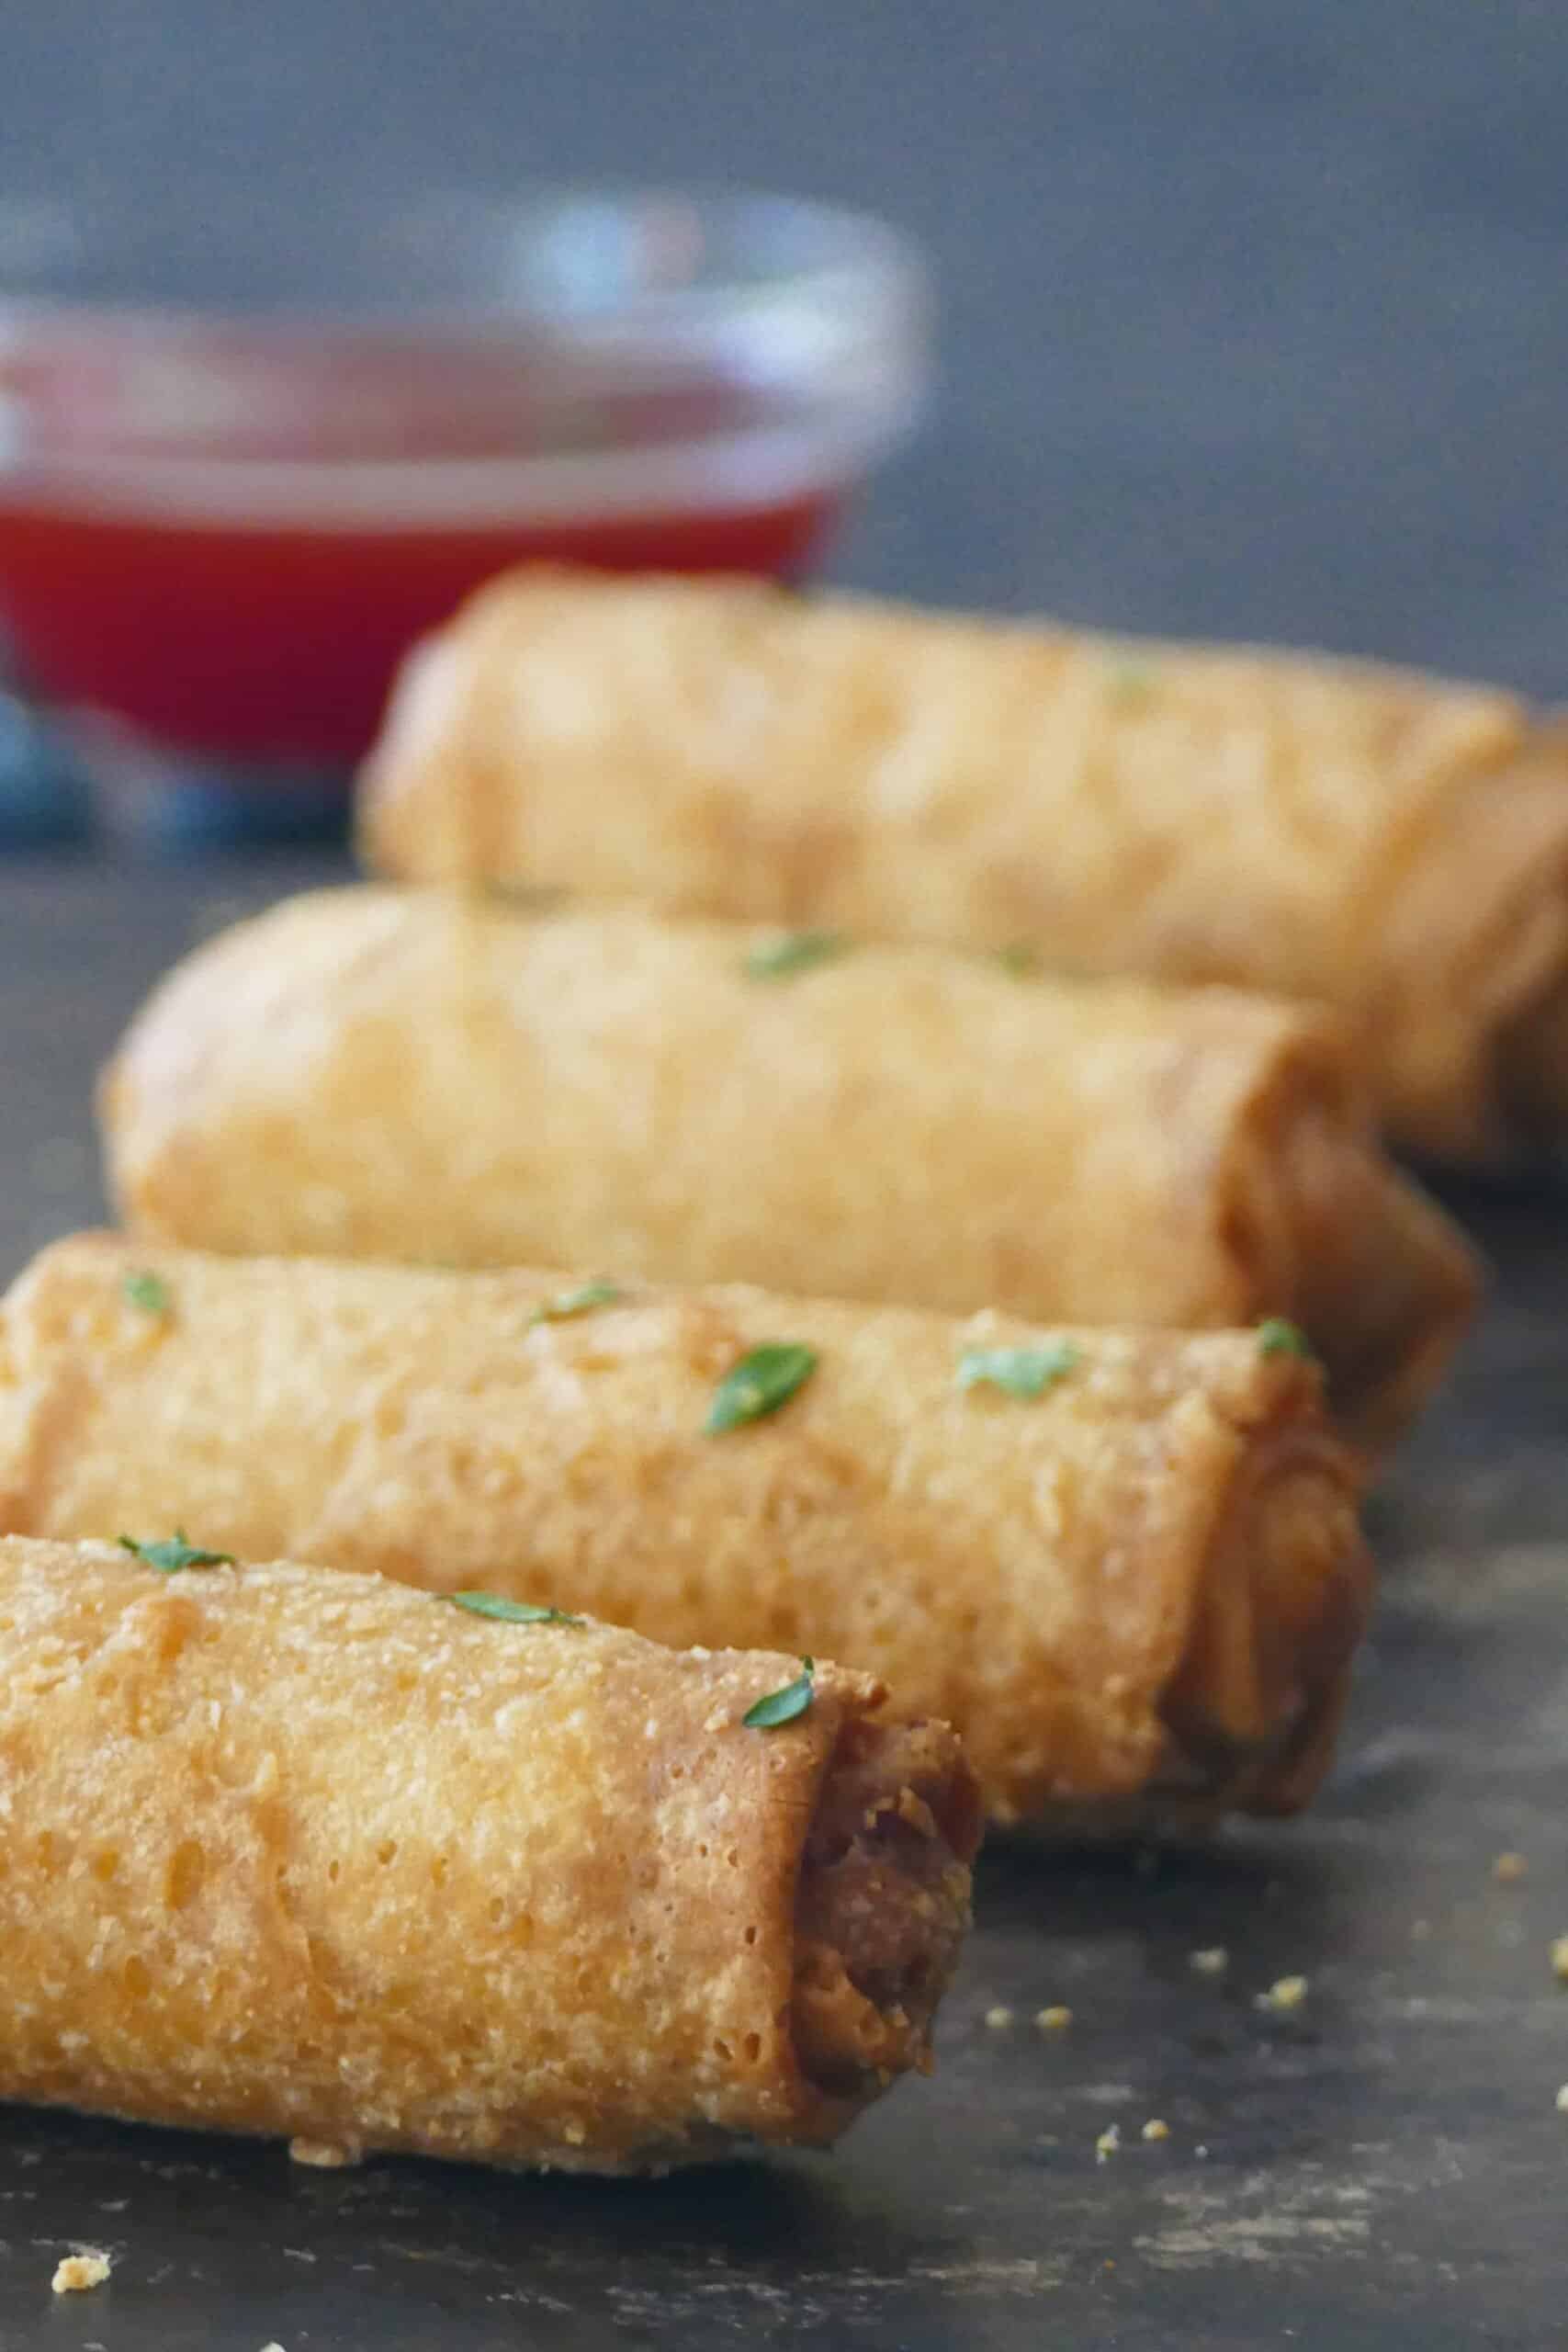 Air fryer frozen egg rolls - 4 whole egg rolls and glass bowl with red chili sauce.